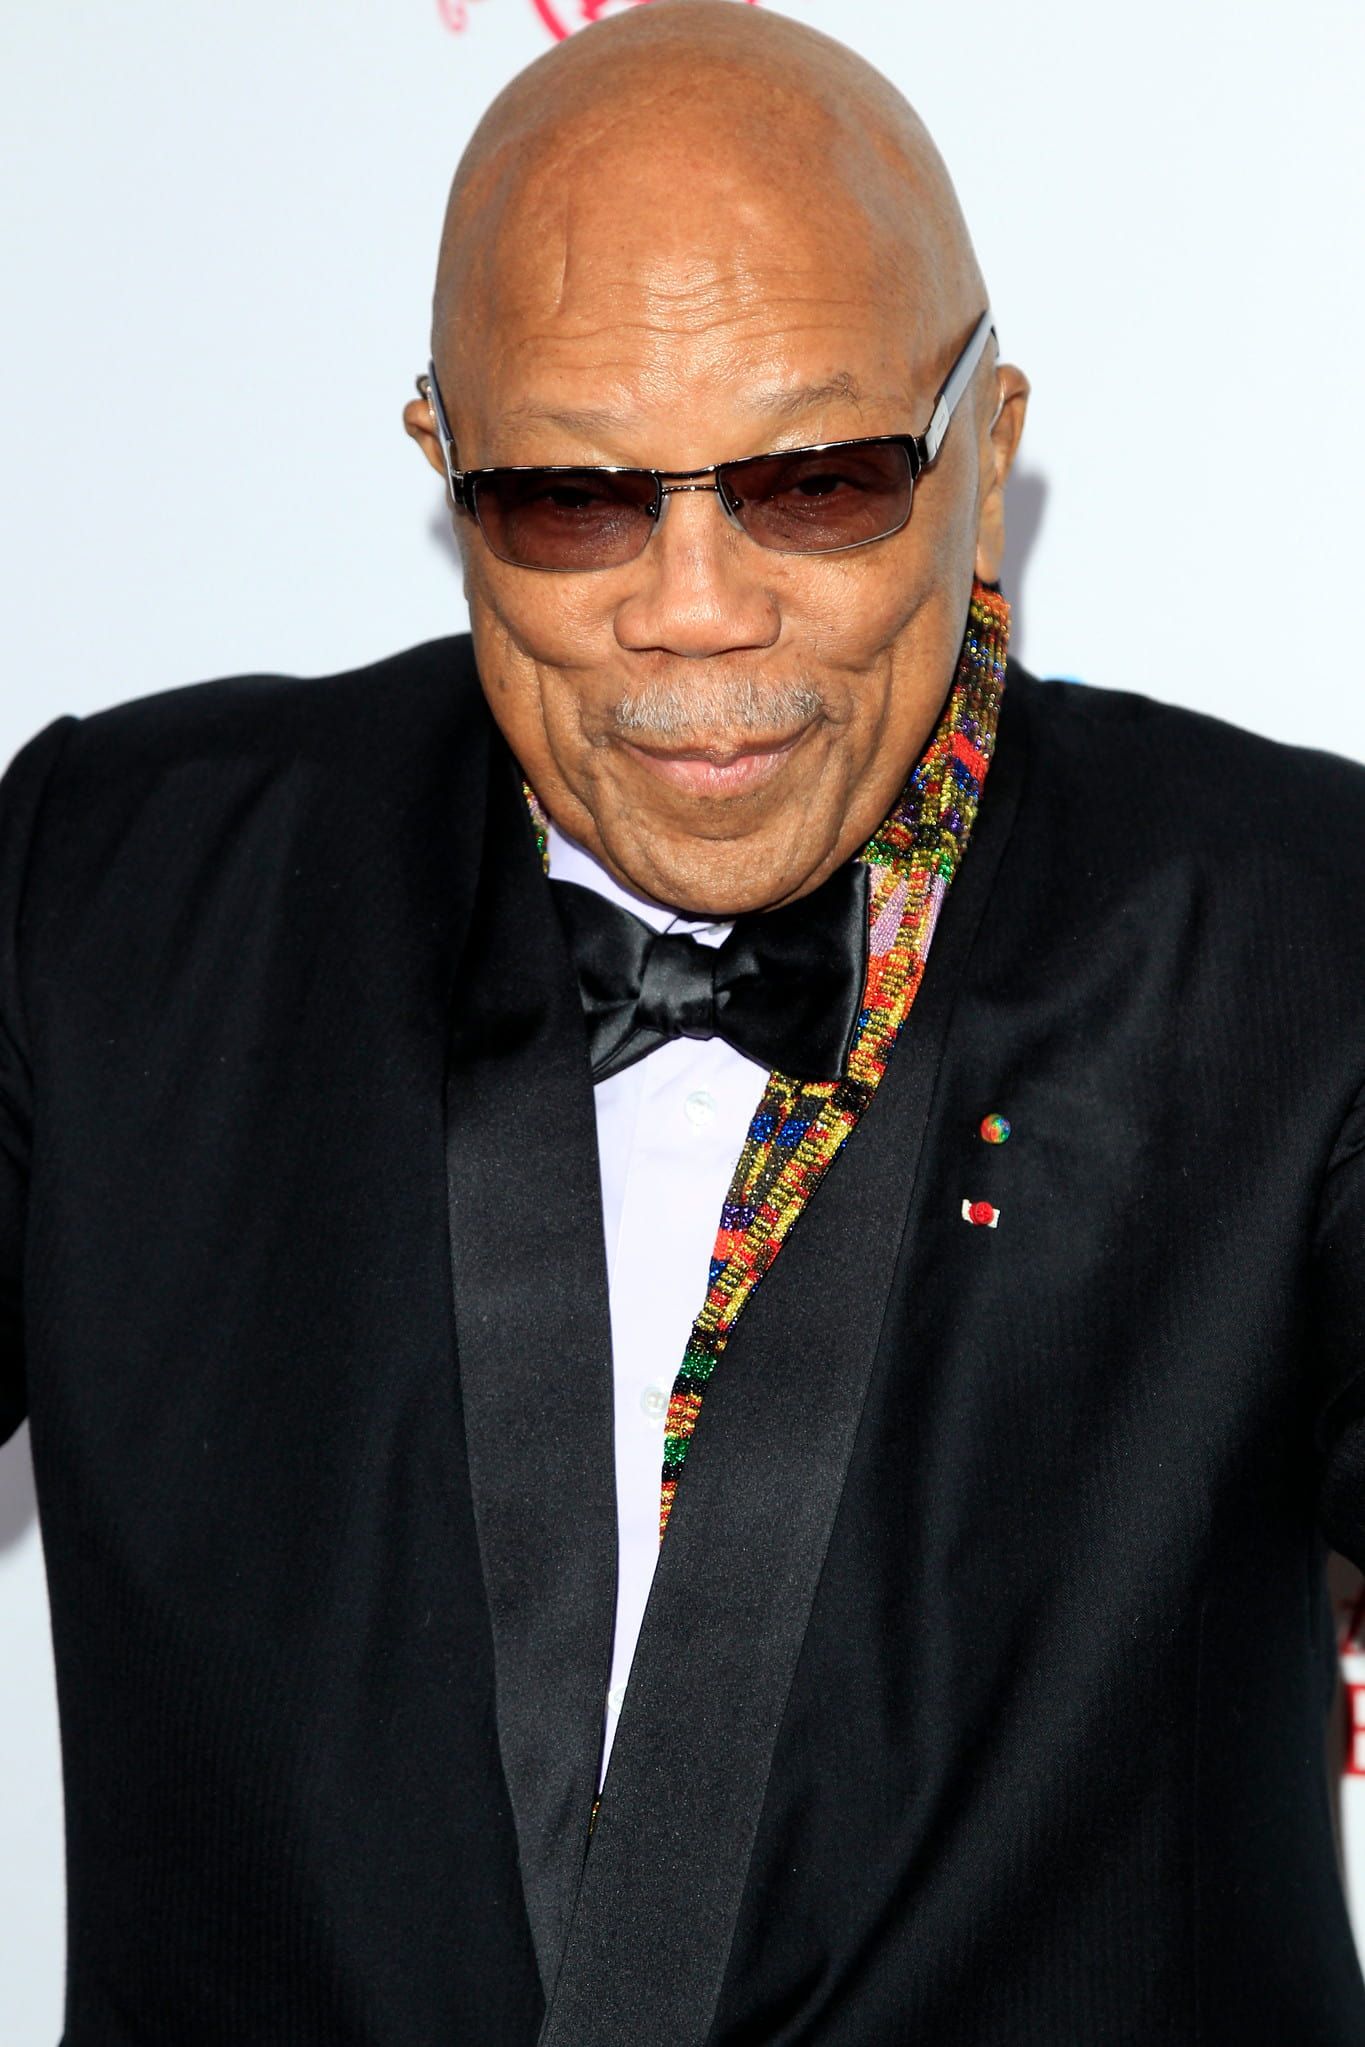 These Quincy Jones quotes will make you feel energized and inspired to kickstart your day.